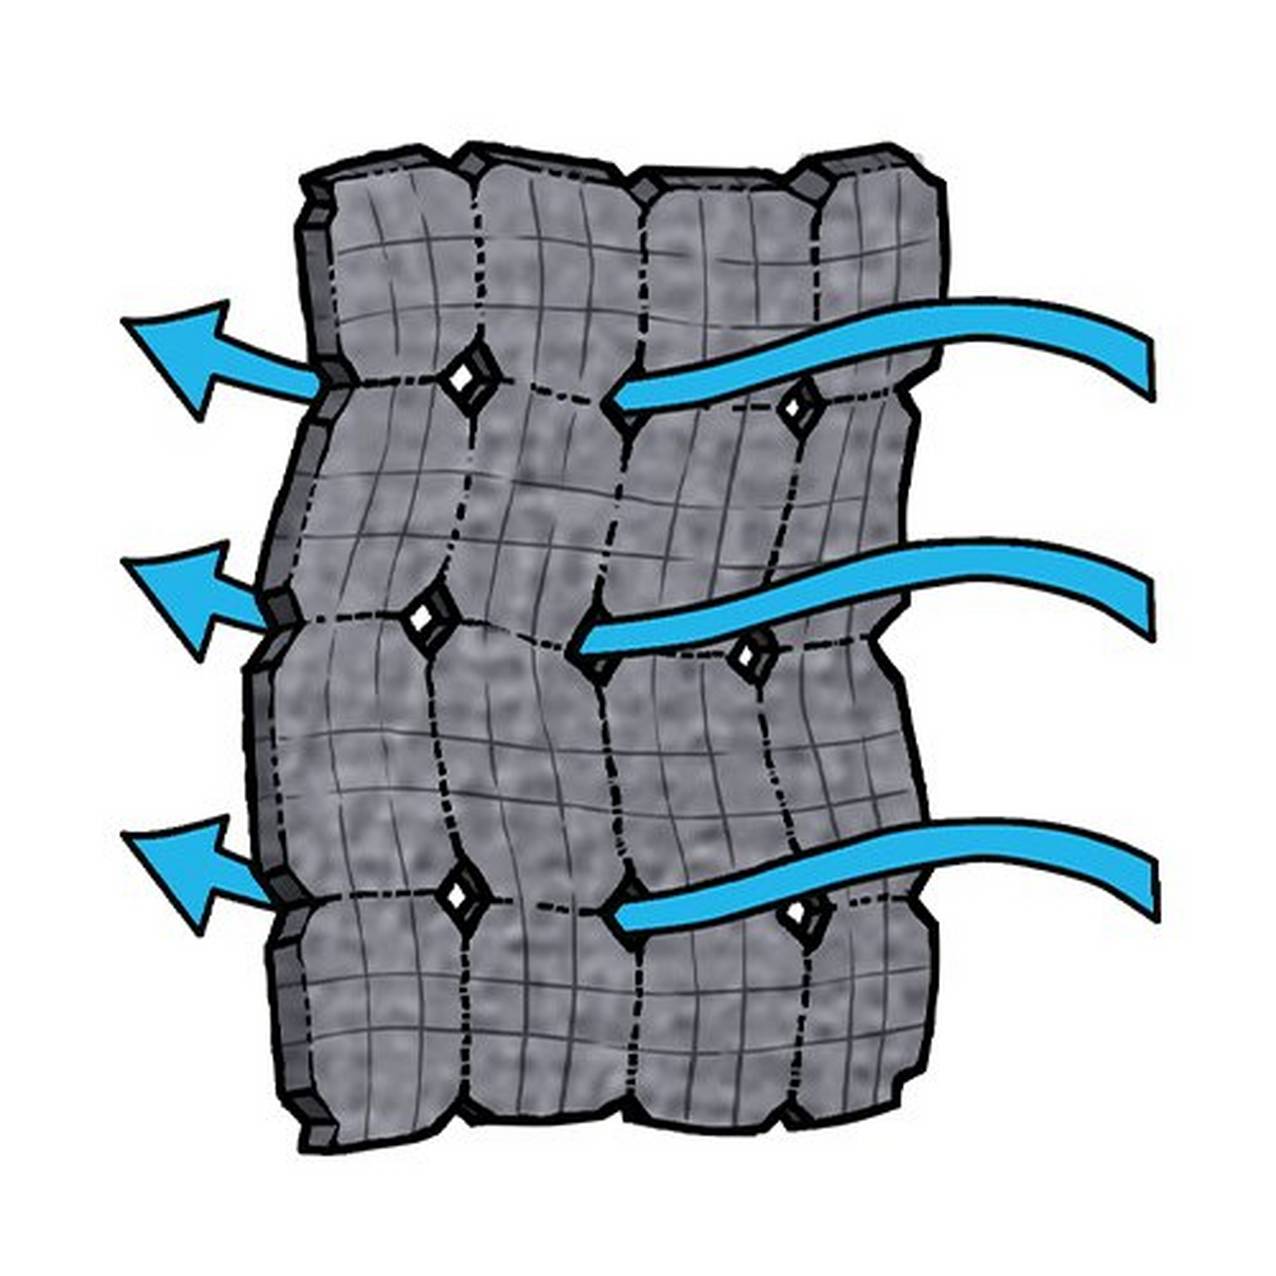 Illustration of a close up of a square of fabric with arrows of air flowing through weave